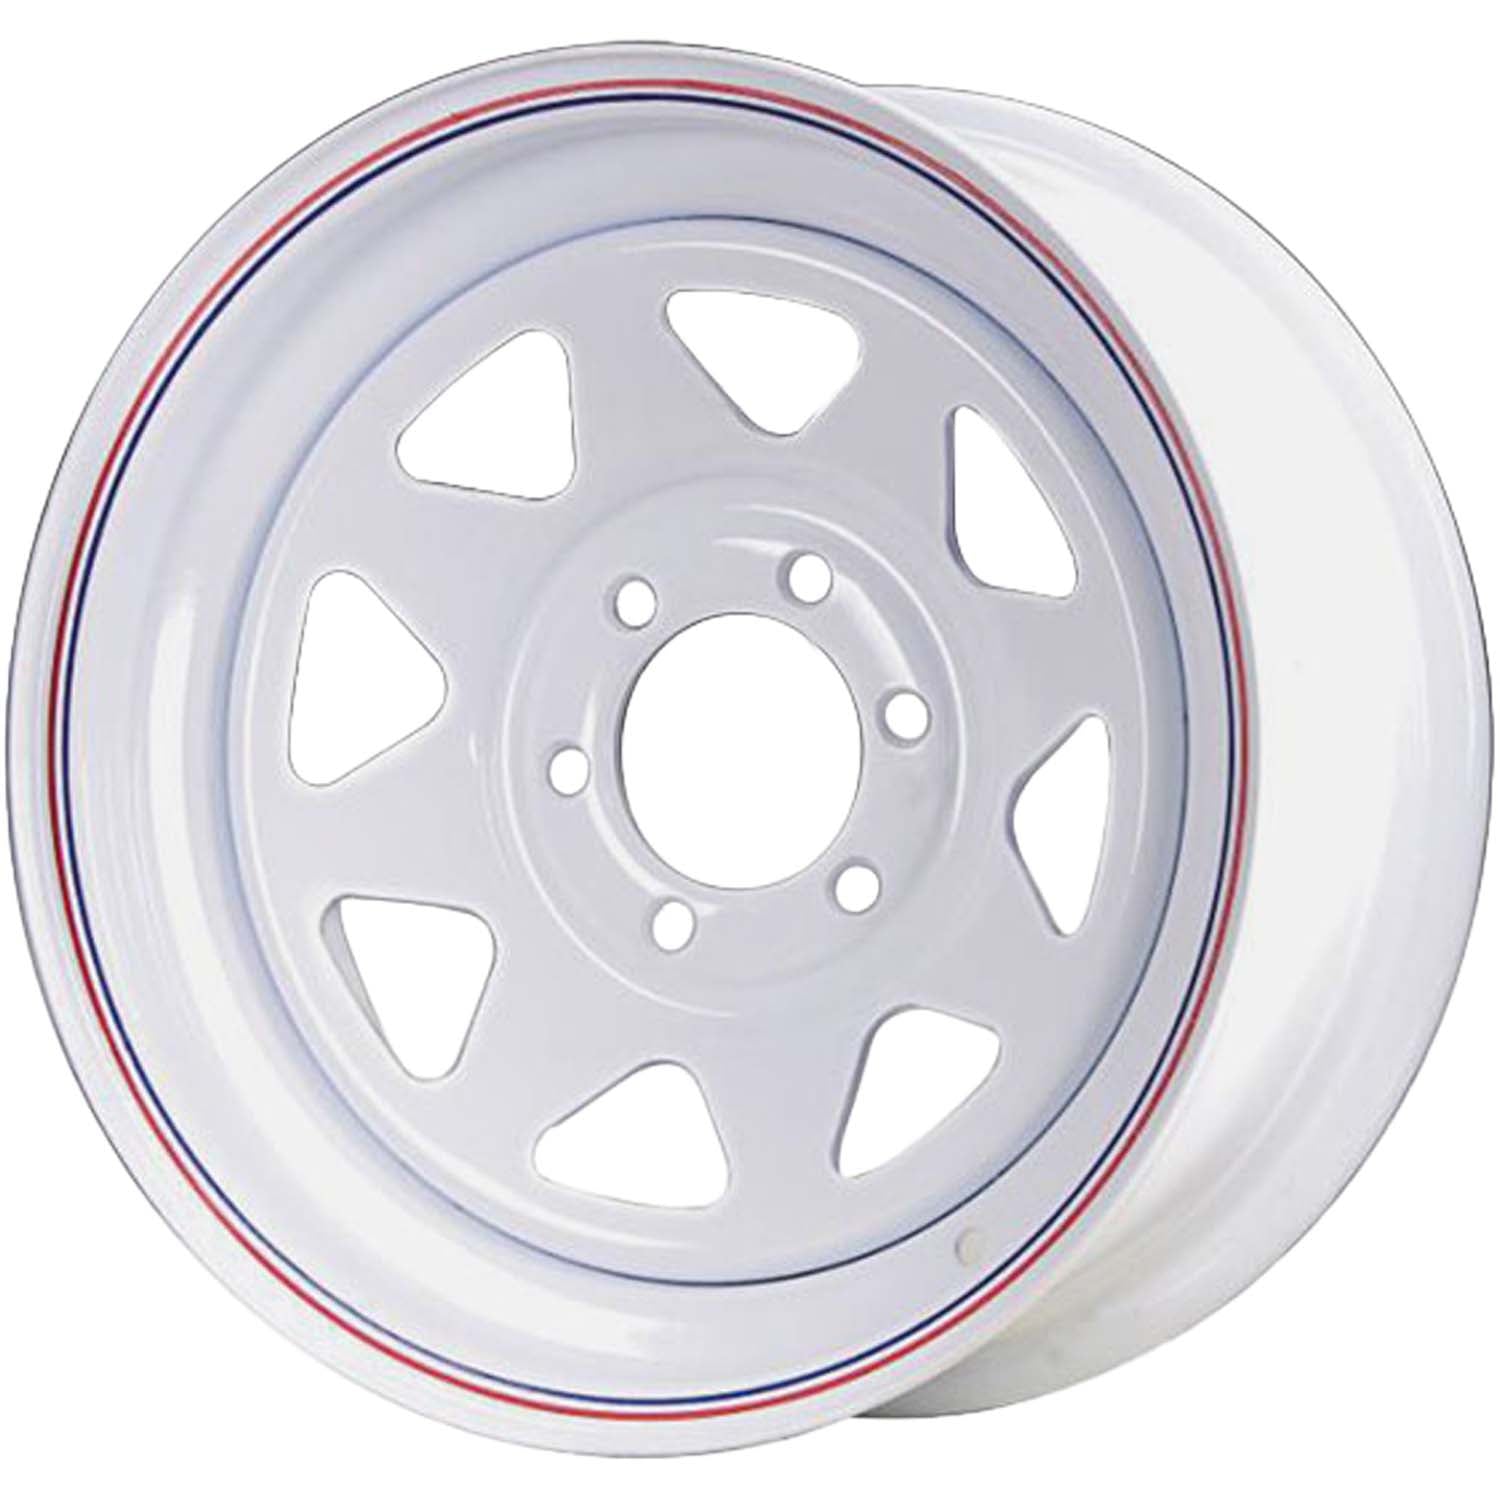 15x6 6 On 5.5 Spoked Steel Trailer Wheel - White with Pin Stripes